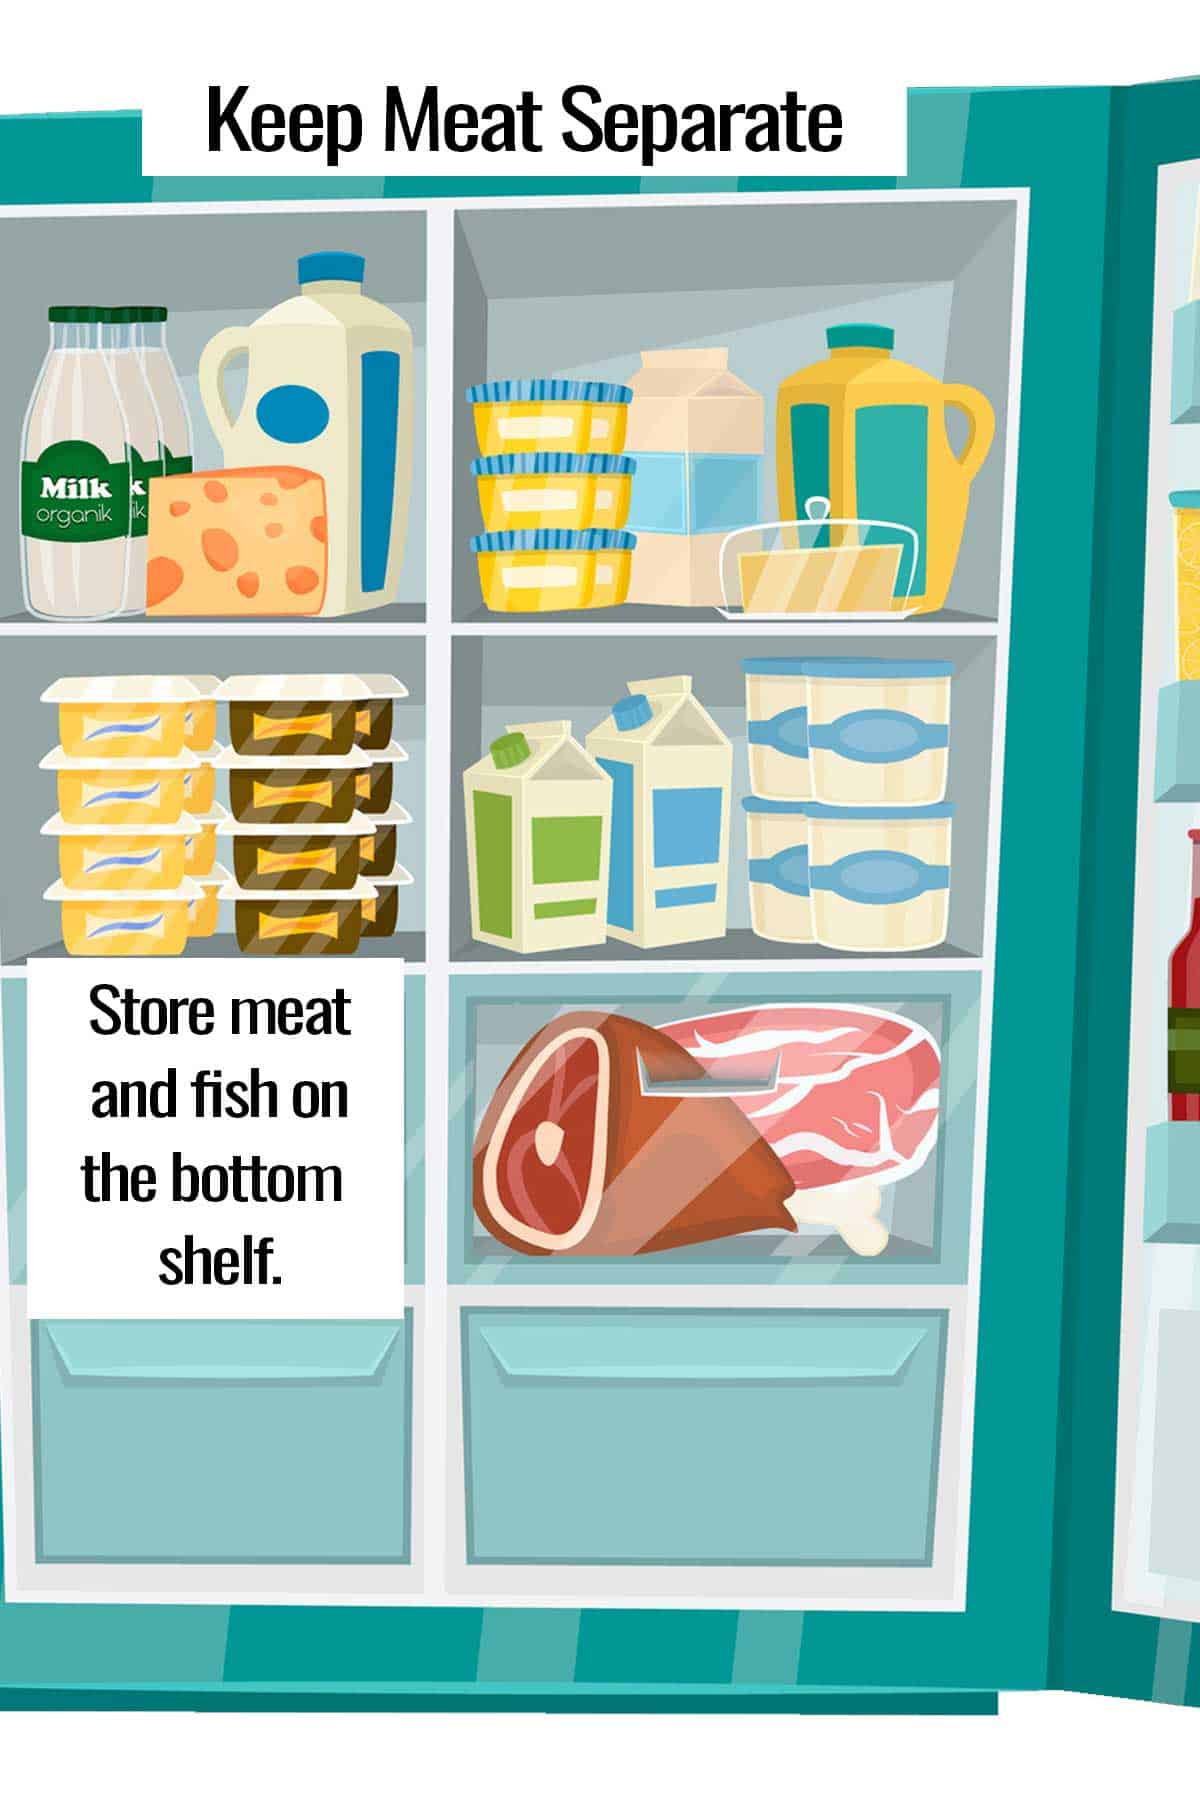 Illustration of an open fridge showing meat and fish being stored on the bottom shelf in a meat bin.